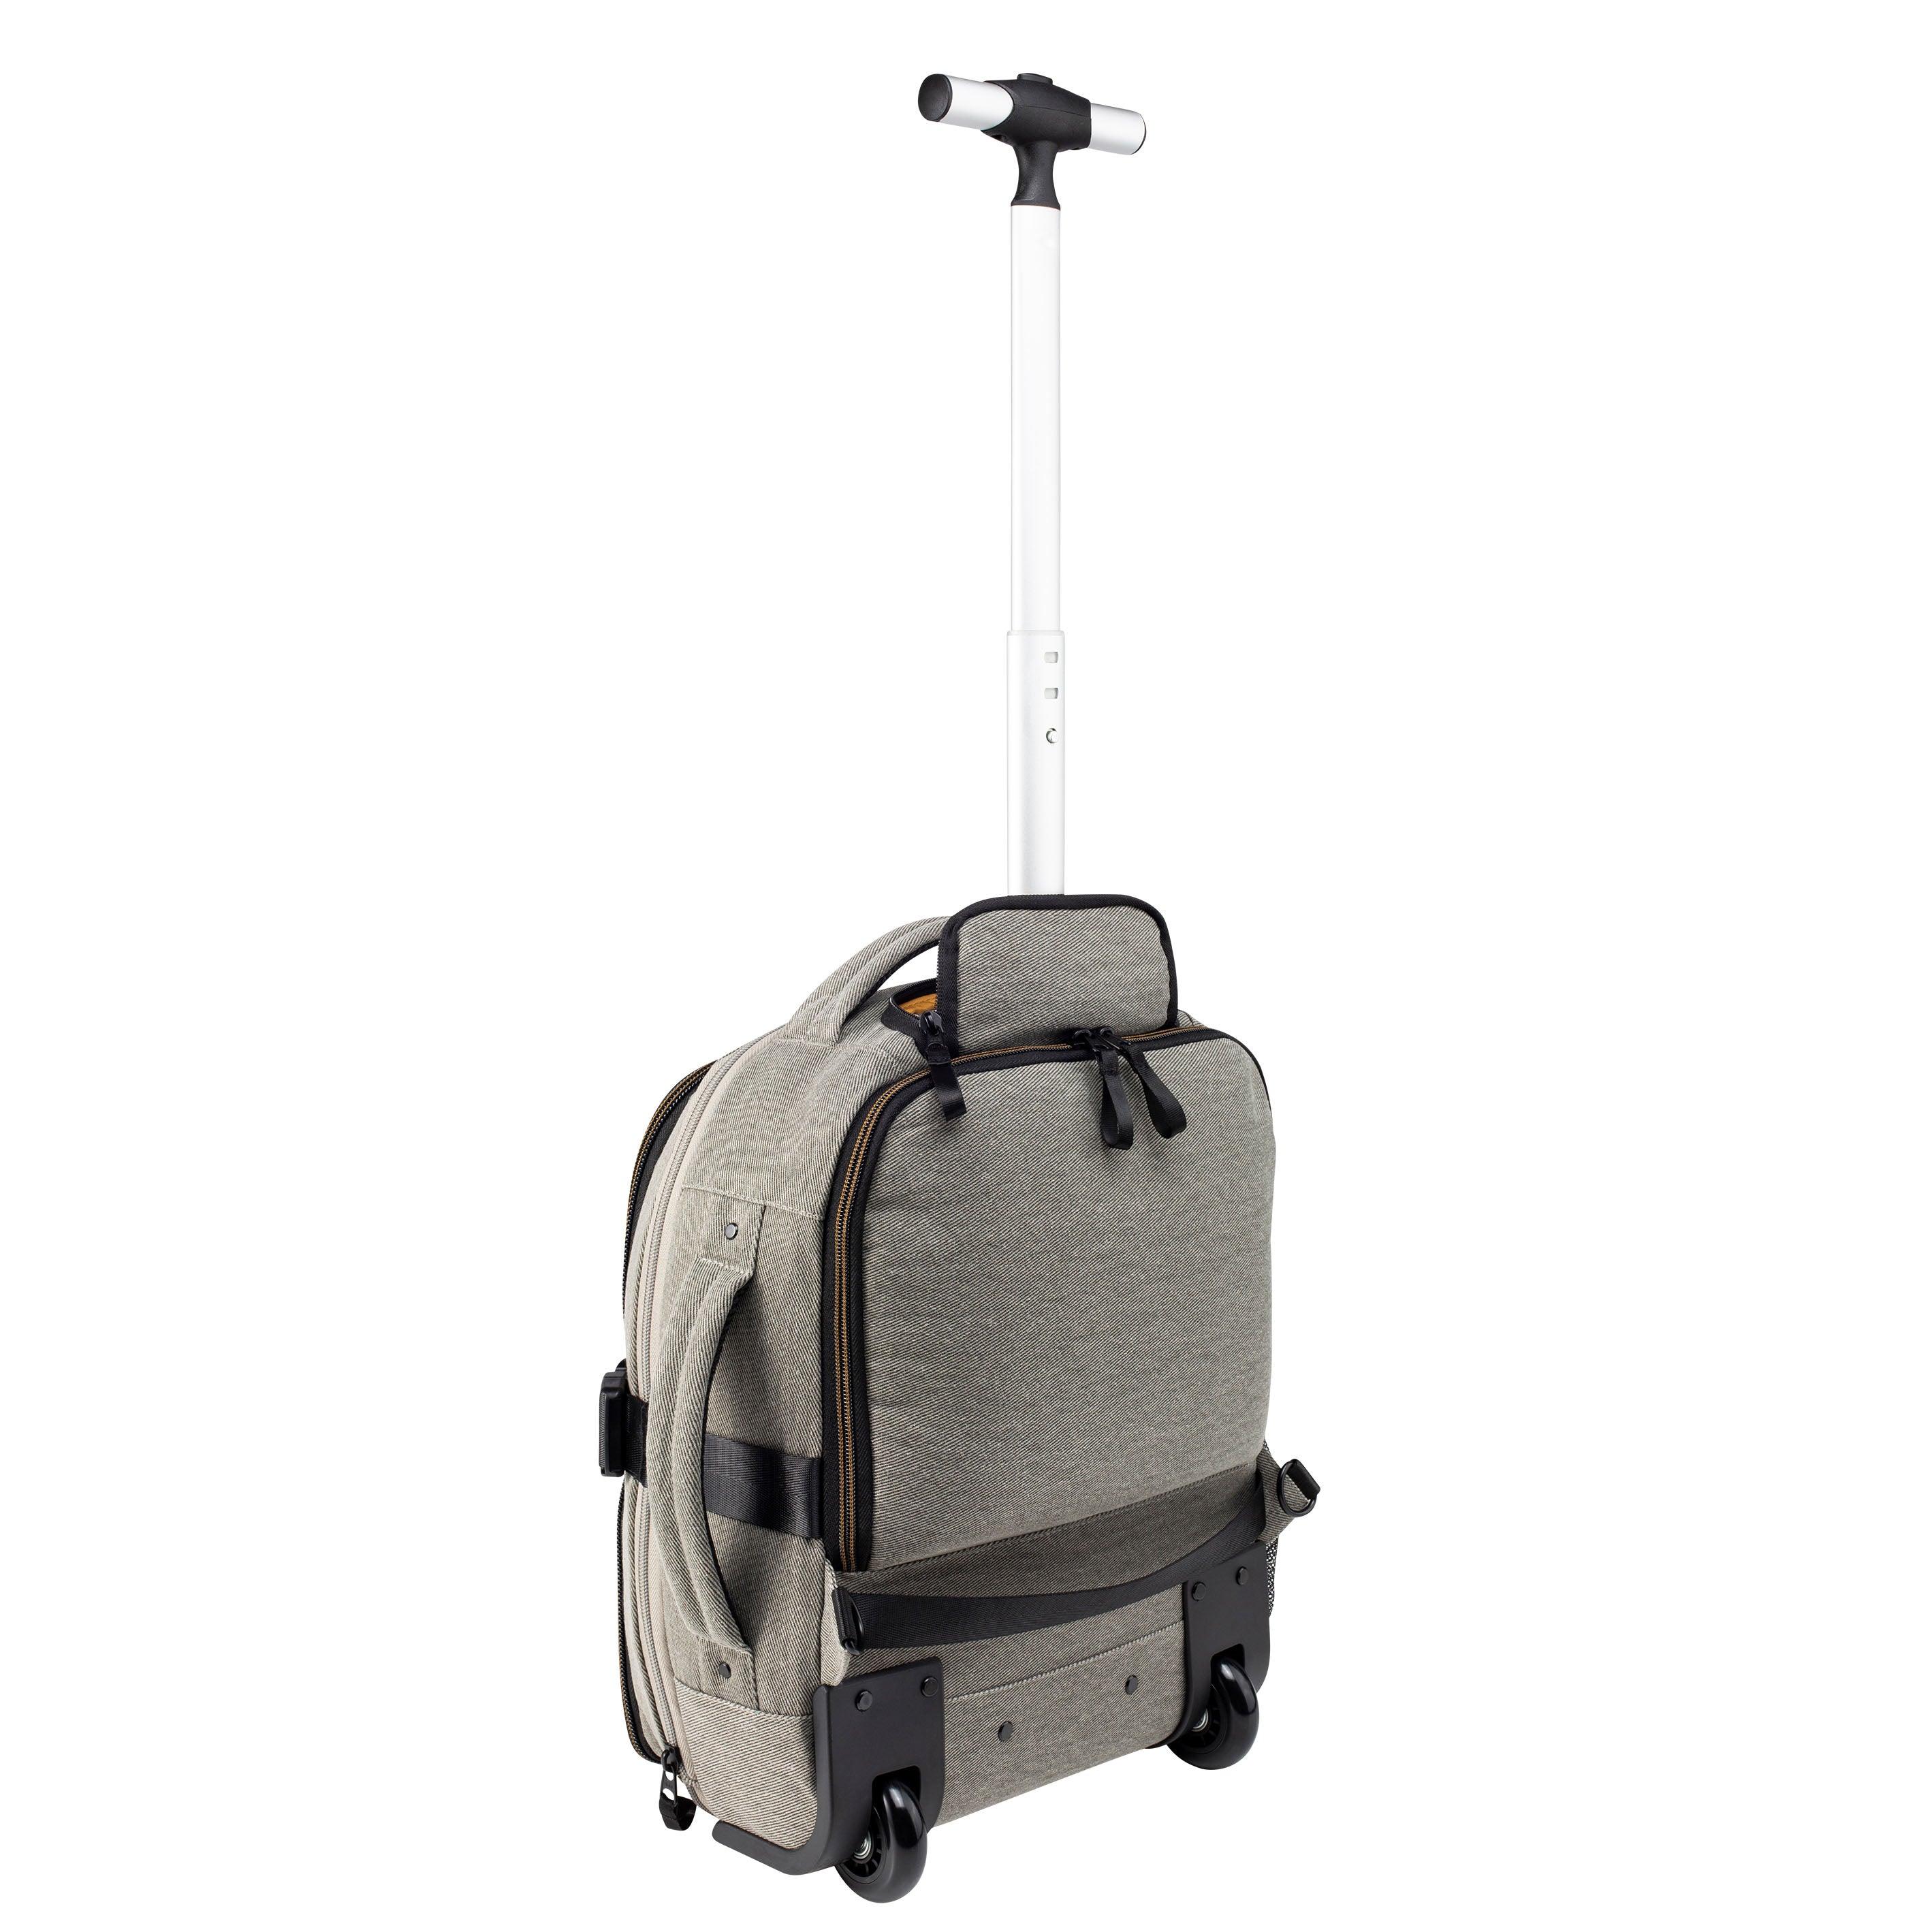  Cabin Max Evos 40x30x15 Expandable to 40x30x20 Hybrid Trolley  Backpack Carry On Hand Luggage, Brown, 40x20x15, Hybrid trolley backpack :  Ropa, Zapatos y Joyería